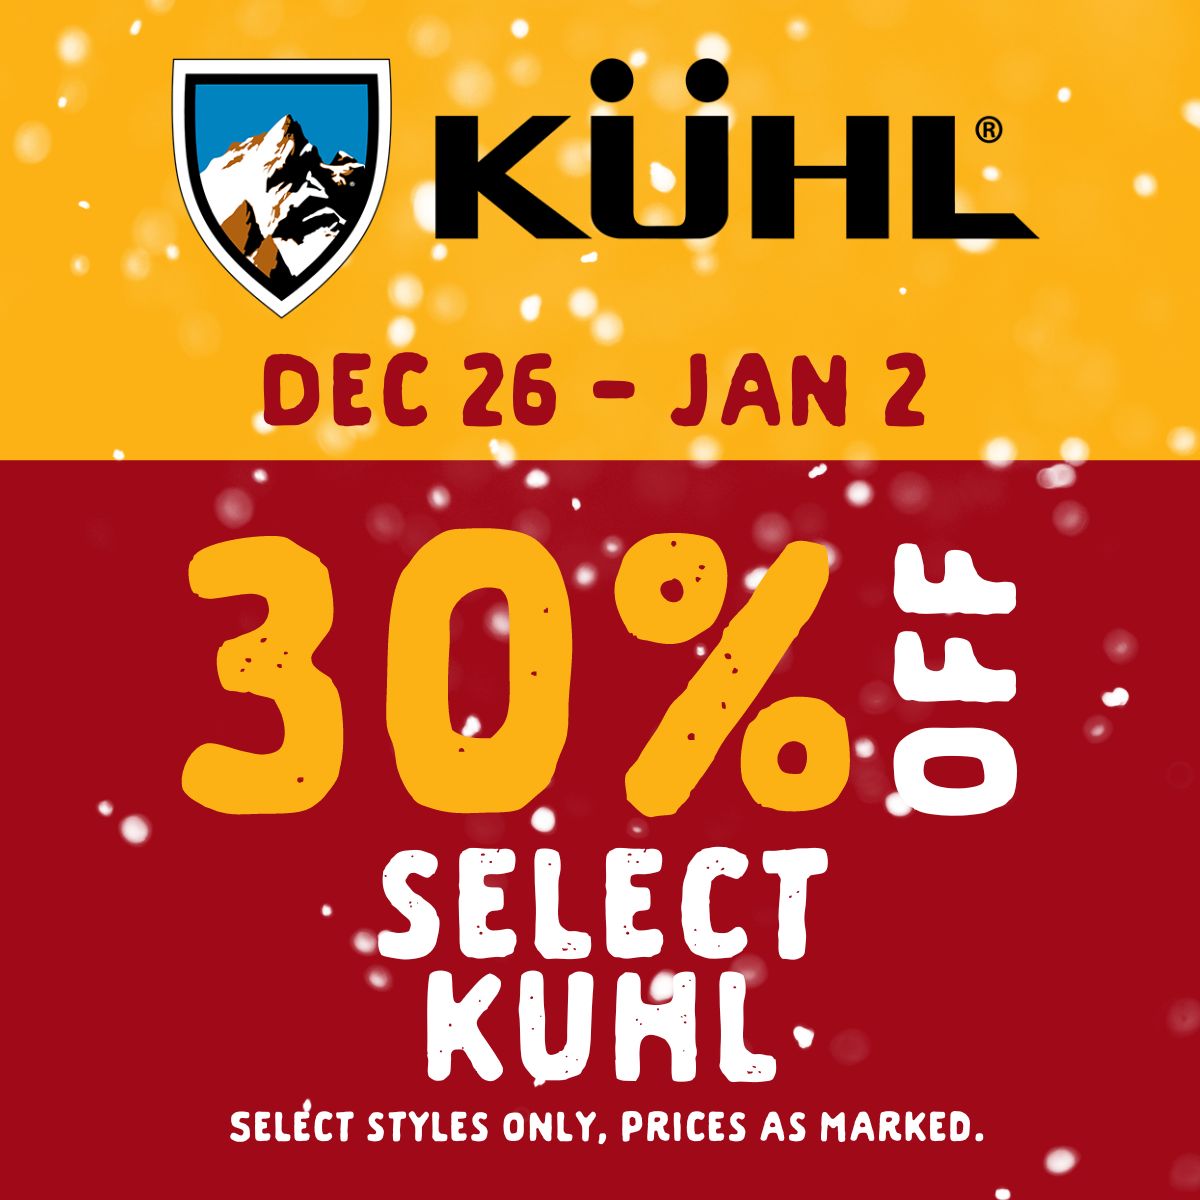 30% off select Kuhl from December 26 until January 2. Select styles only, prices as marked.